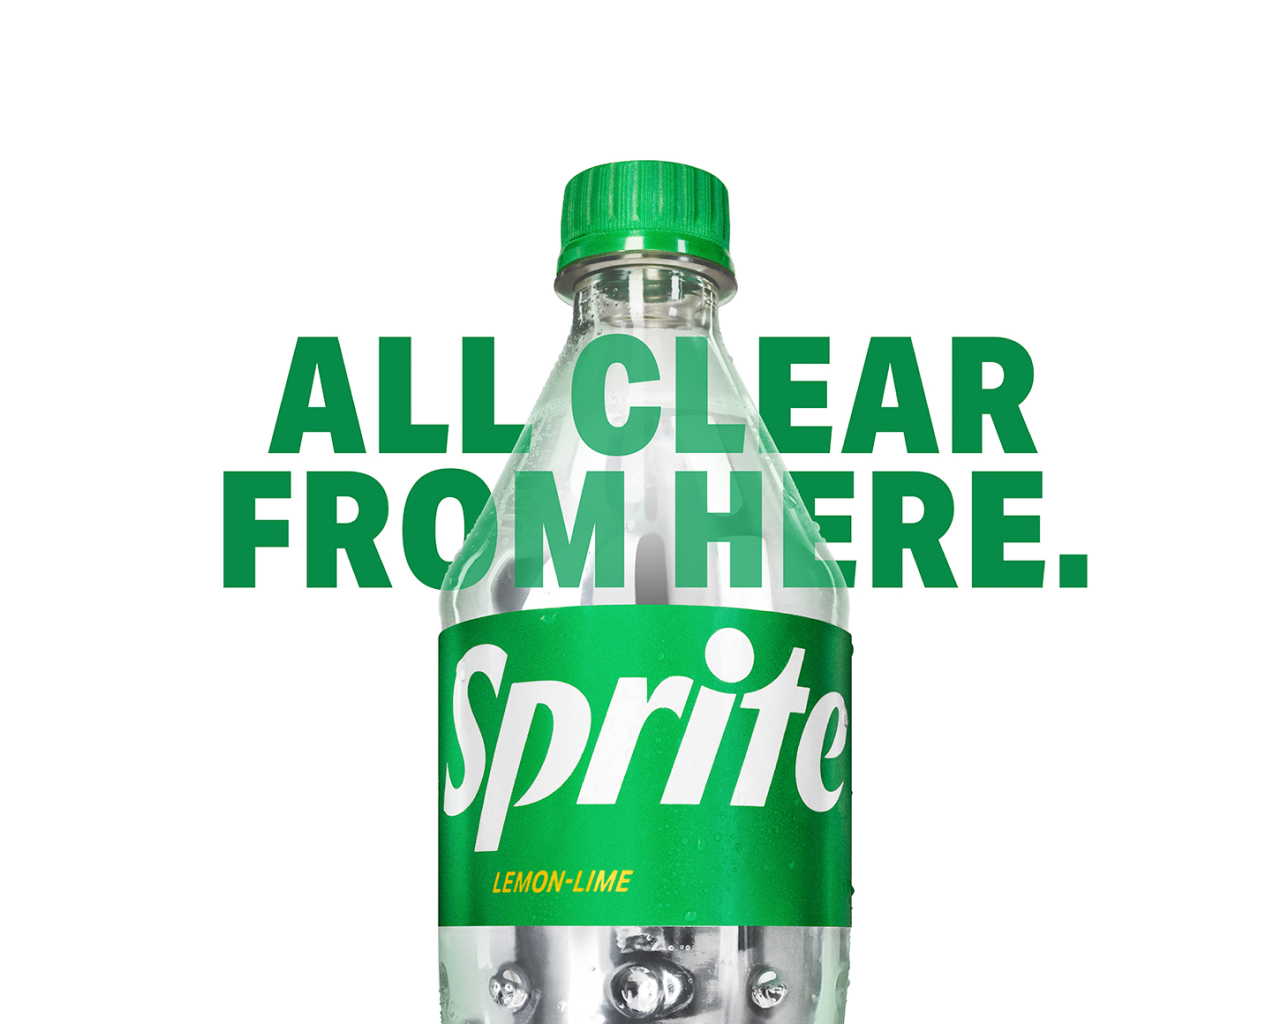 Sprite Drink: Most Up-to-Date Encyclopedia, News & Reviews